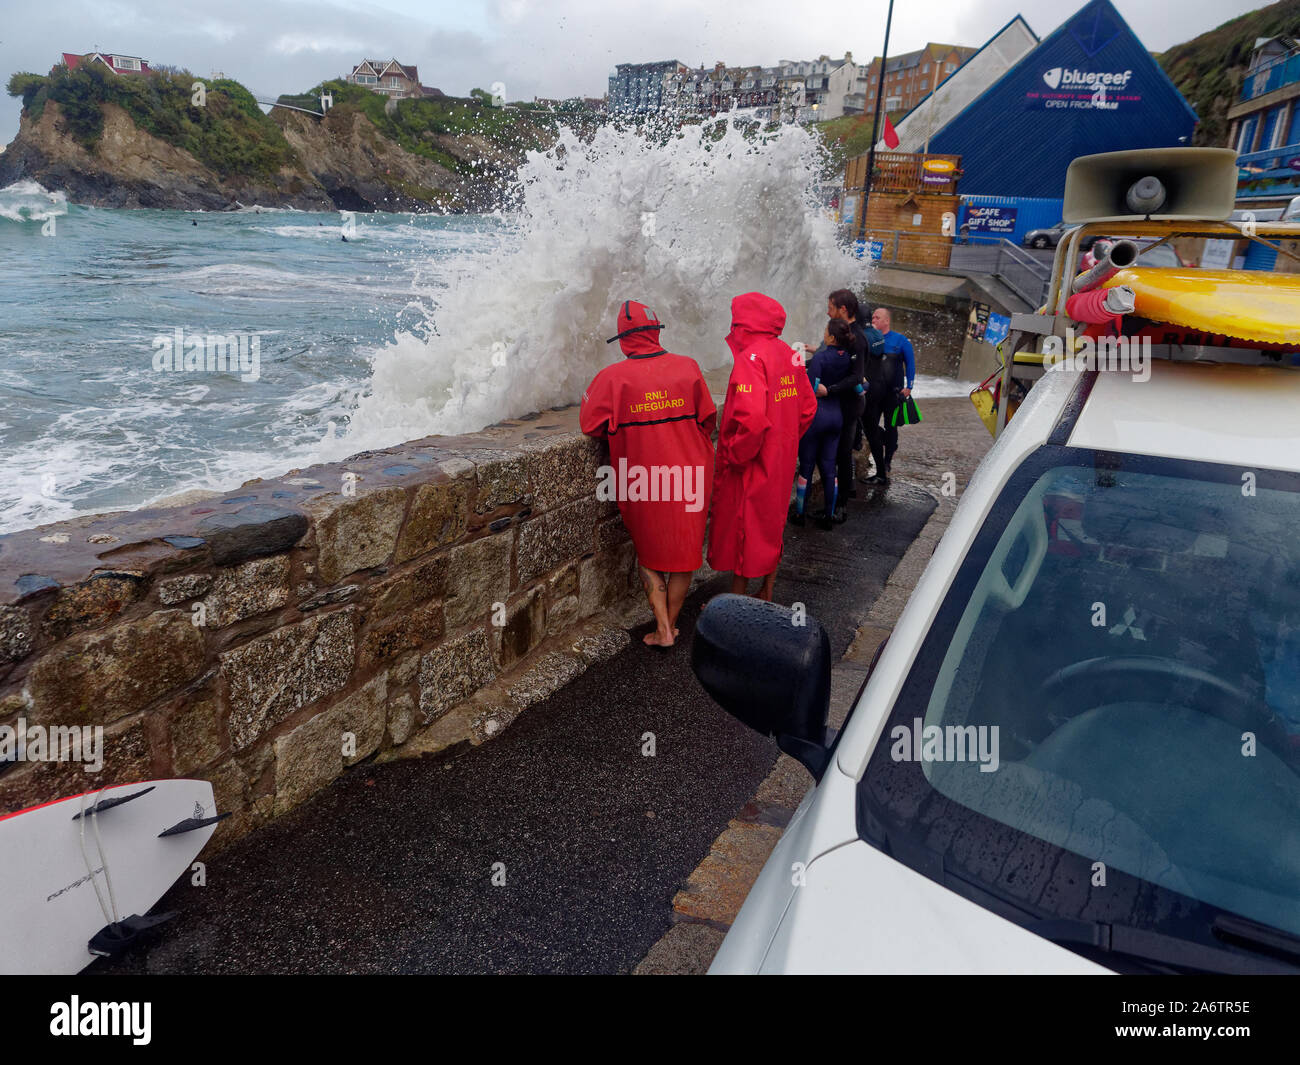 Newquay, Cornwall, England, 27th September 2019. UK weather: Spring tides and global sea level rises inundate coastal resorts and involve RNLI. Stock Photo